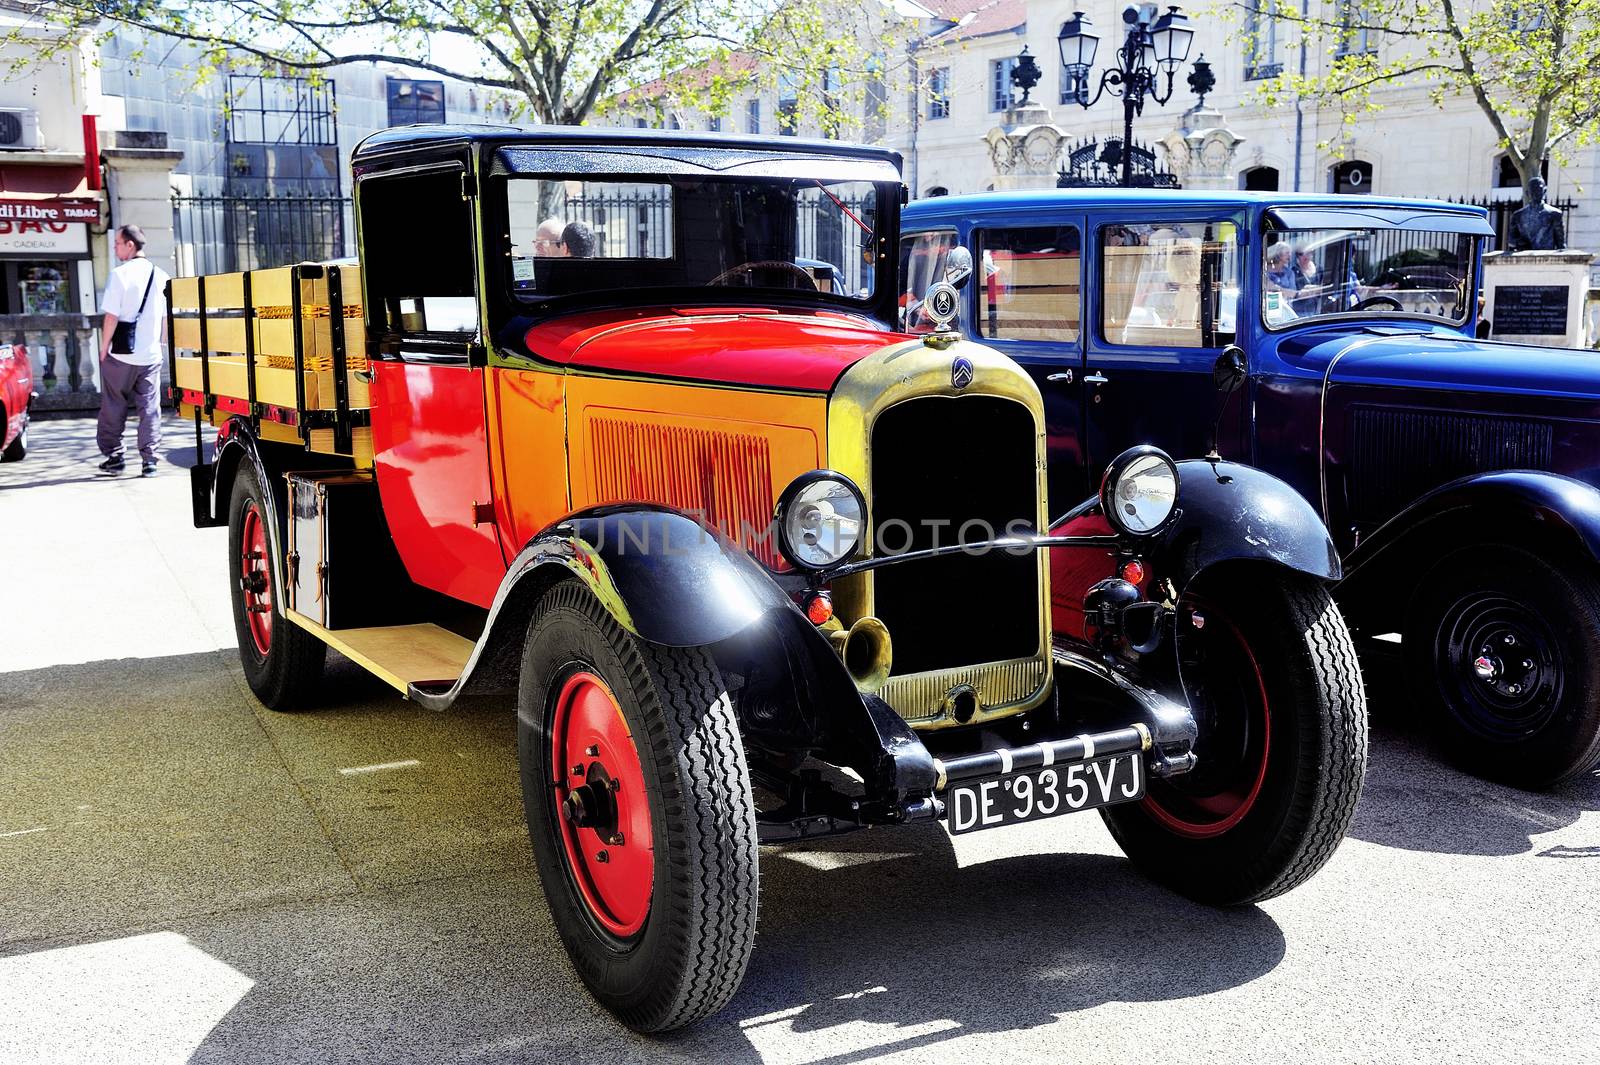 old Citroen car from the 1920s by gillespaire